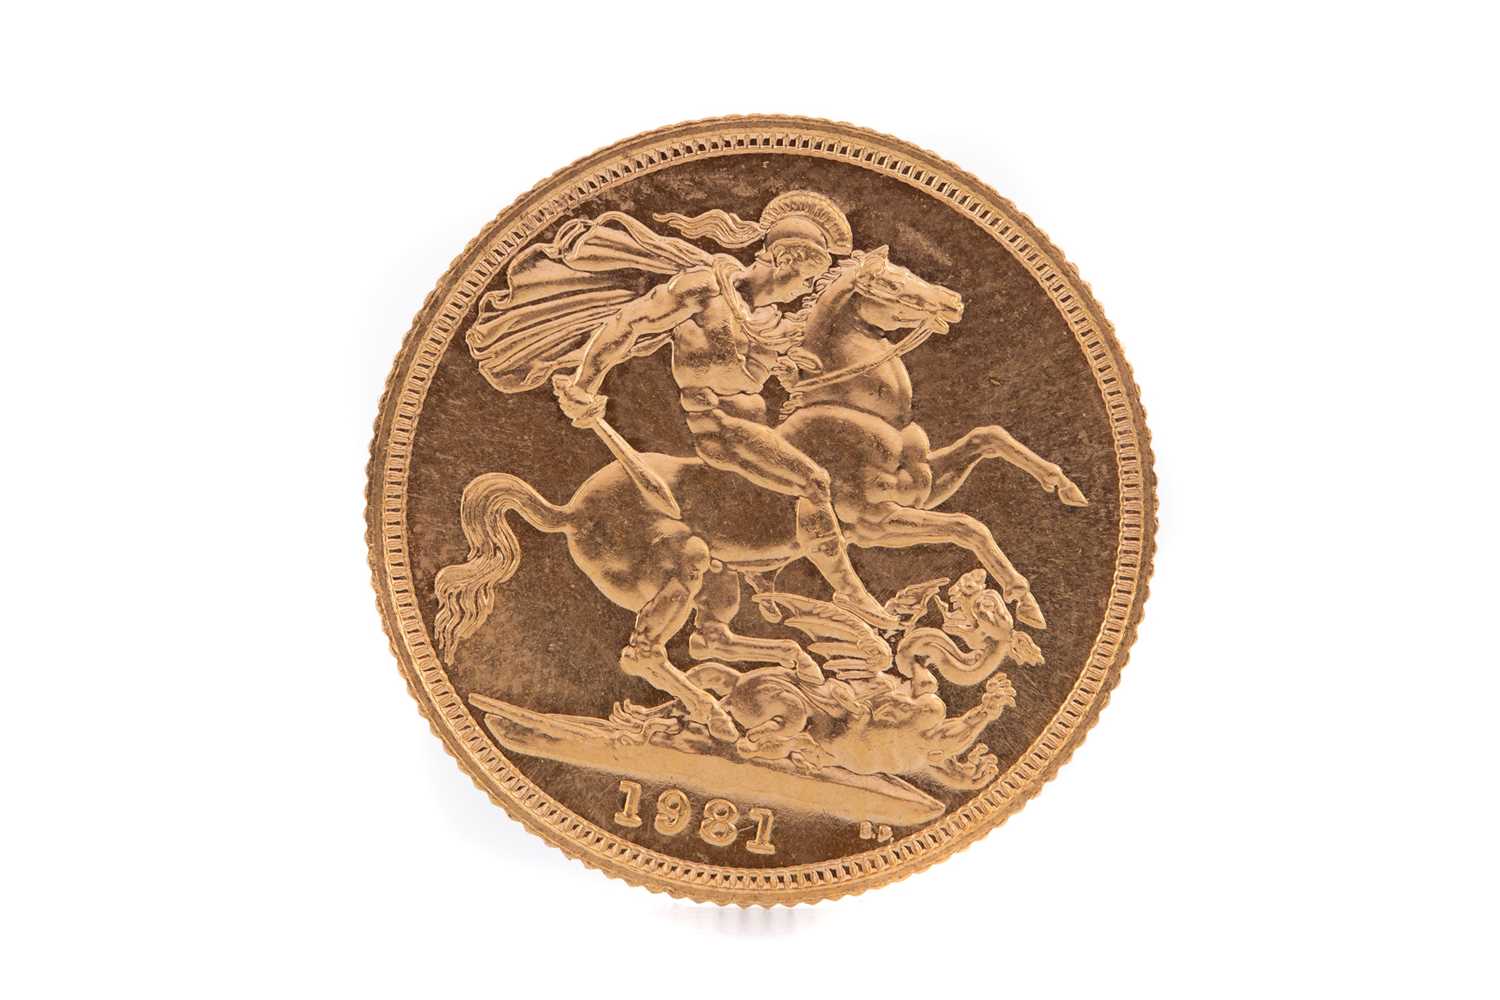 Lot 80 - AN ELIZABETH II GOLD SOVEREIGN DATED 1981